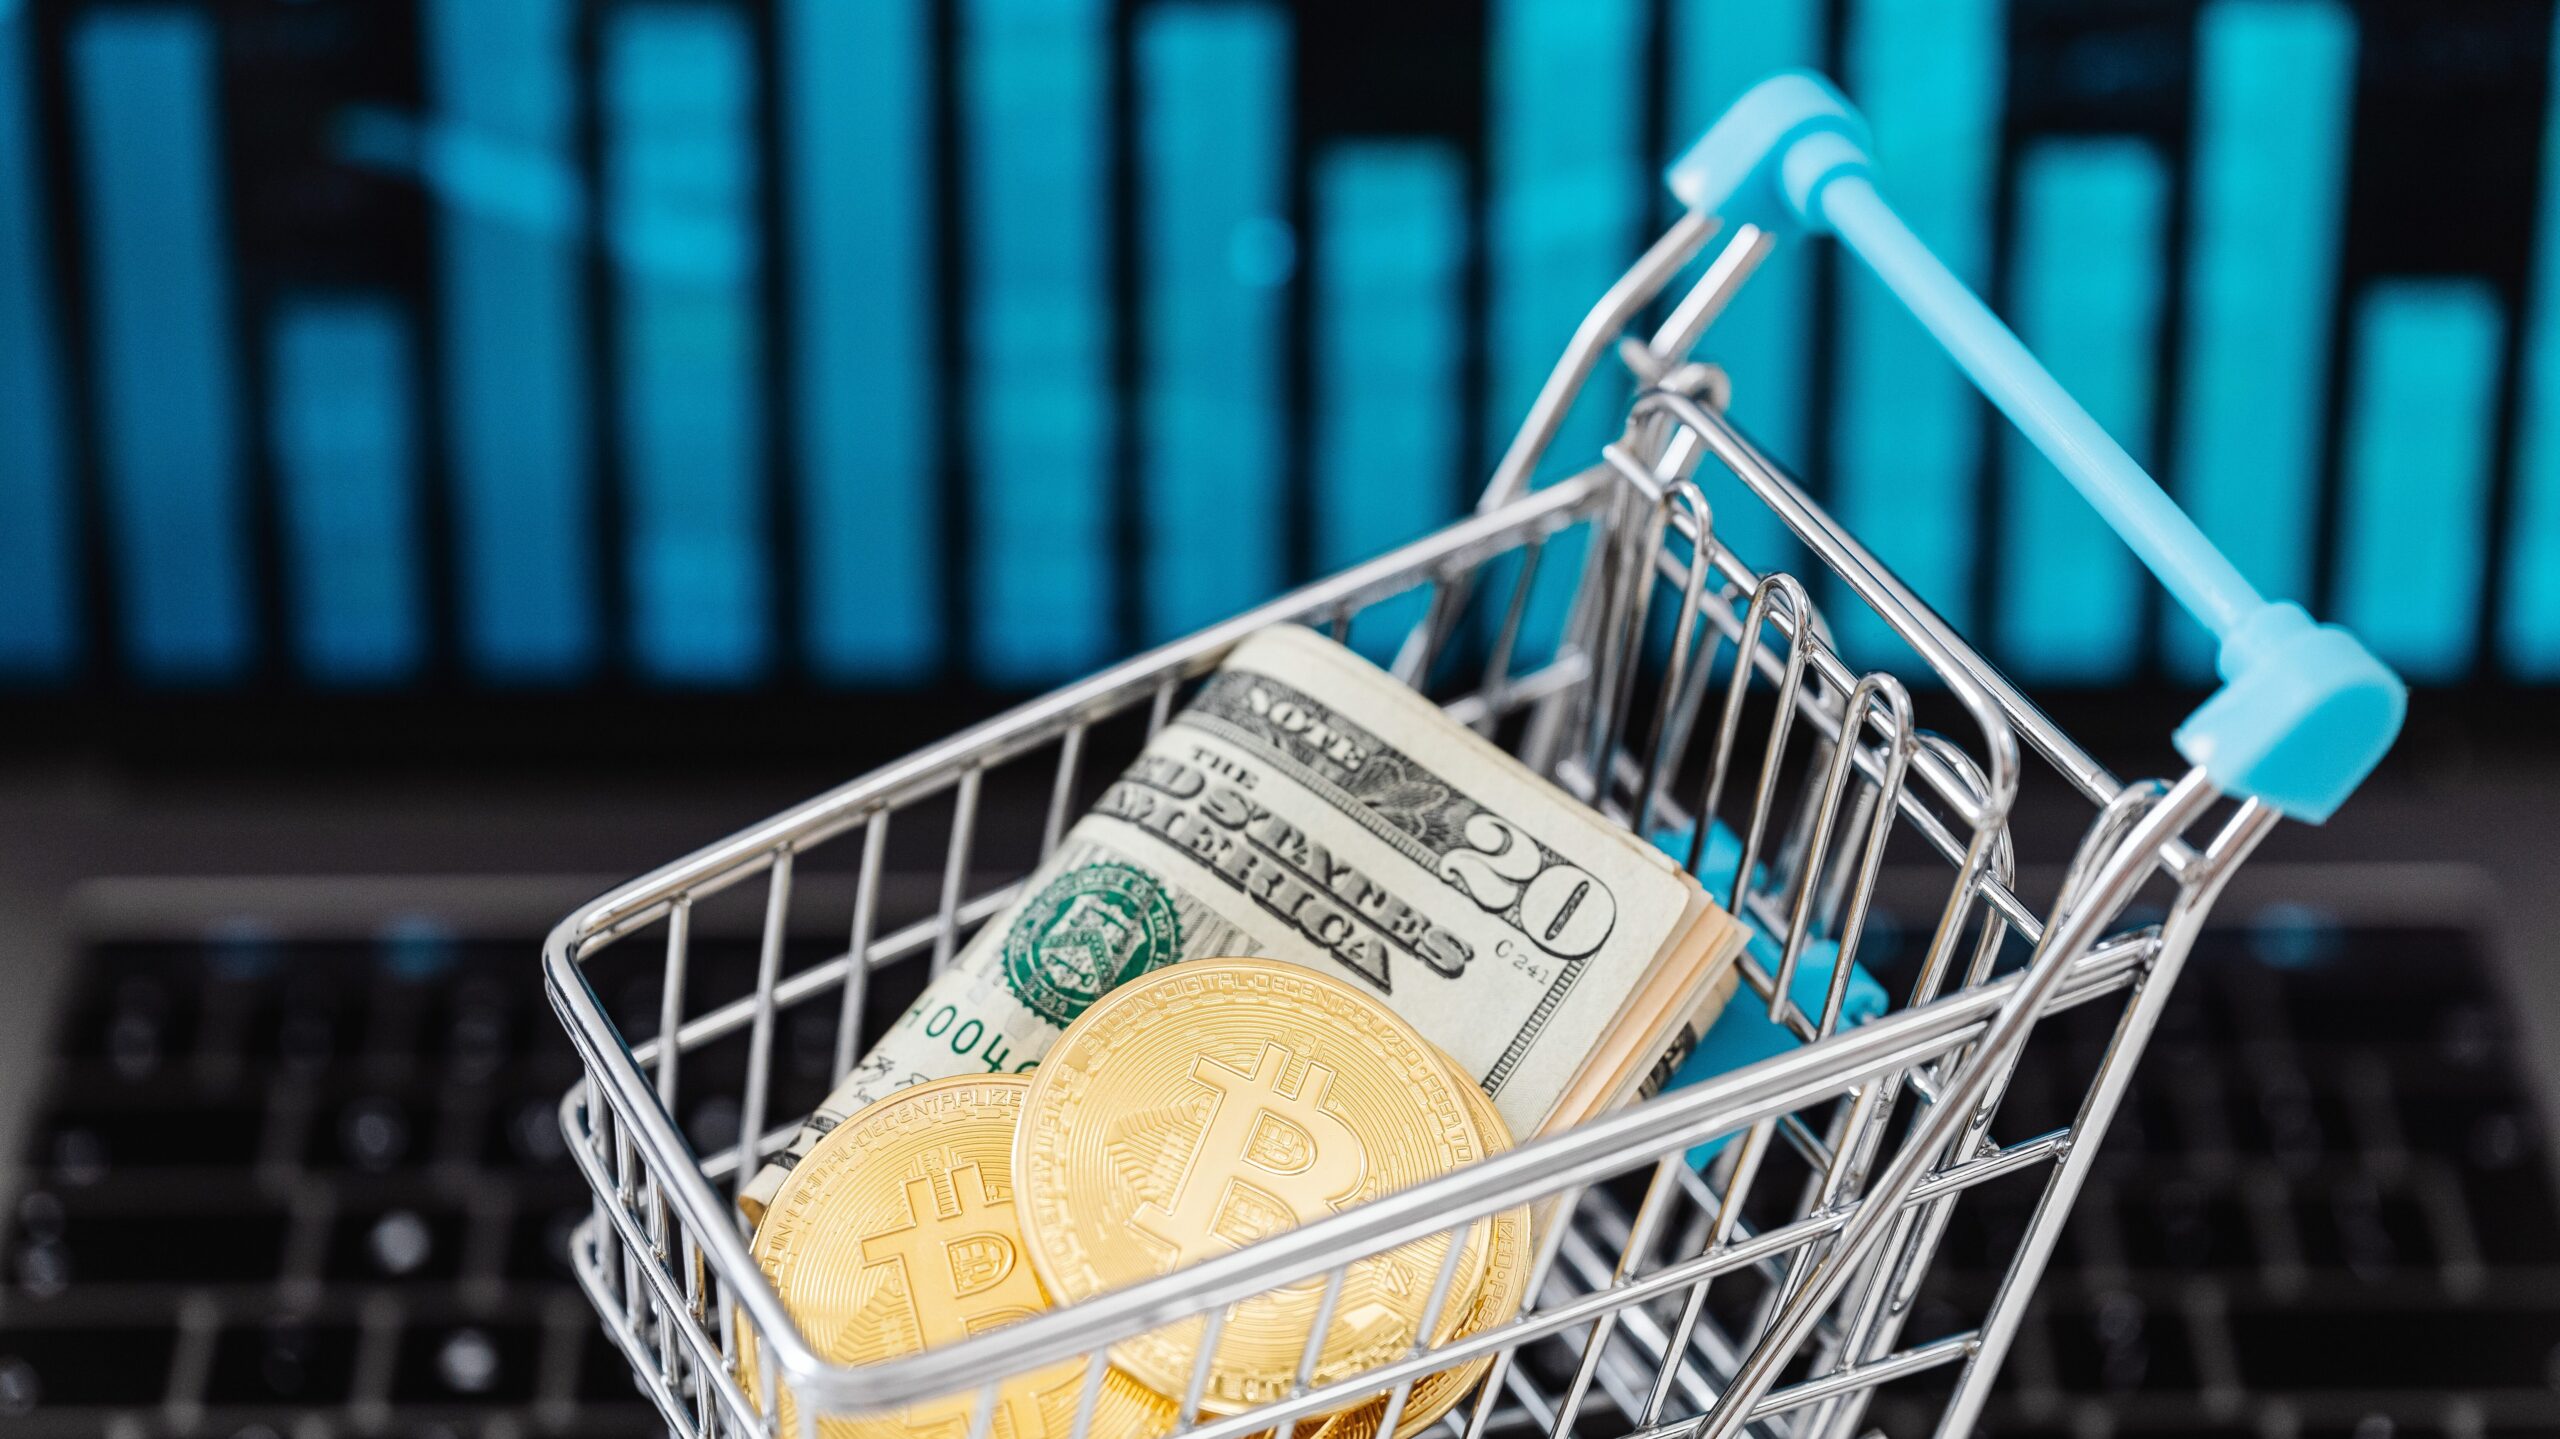 Shopping and Managing Money